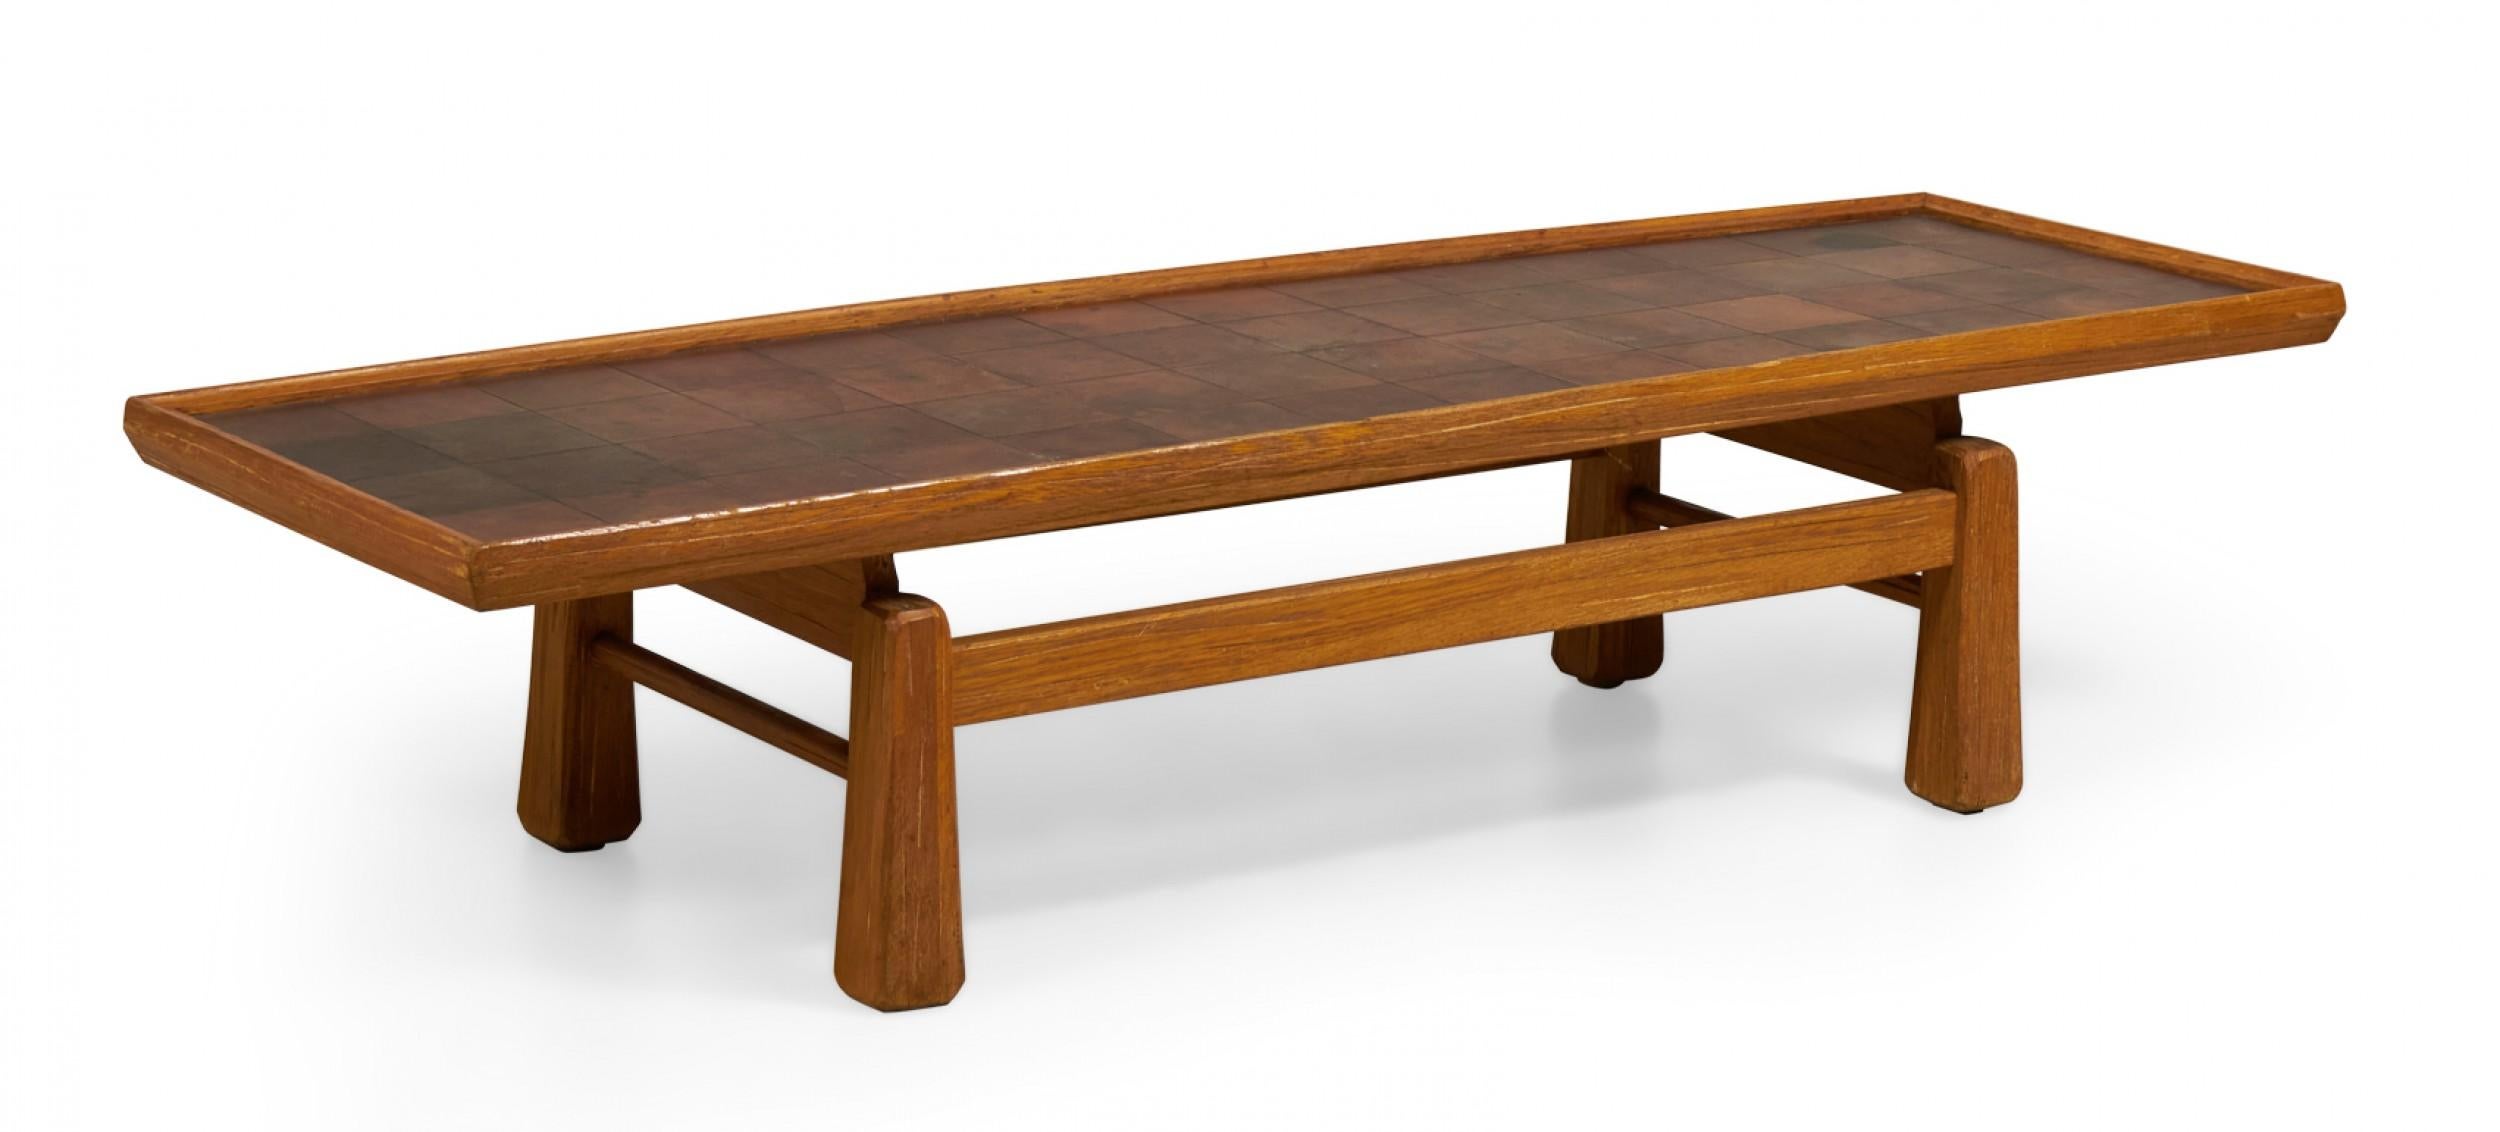 20th Century Brandt Ranch Rustic Oak and Leather Patchwork Coffee / Cocktail Tabl For Sale